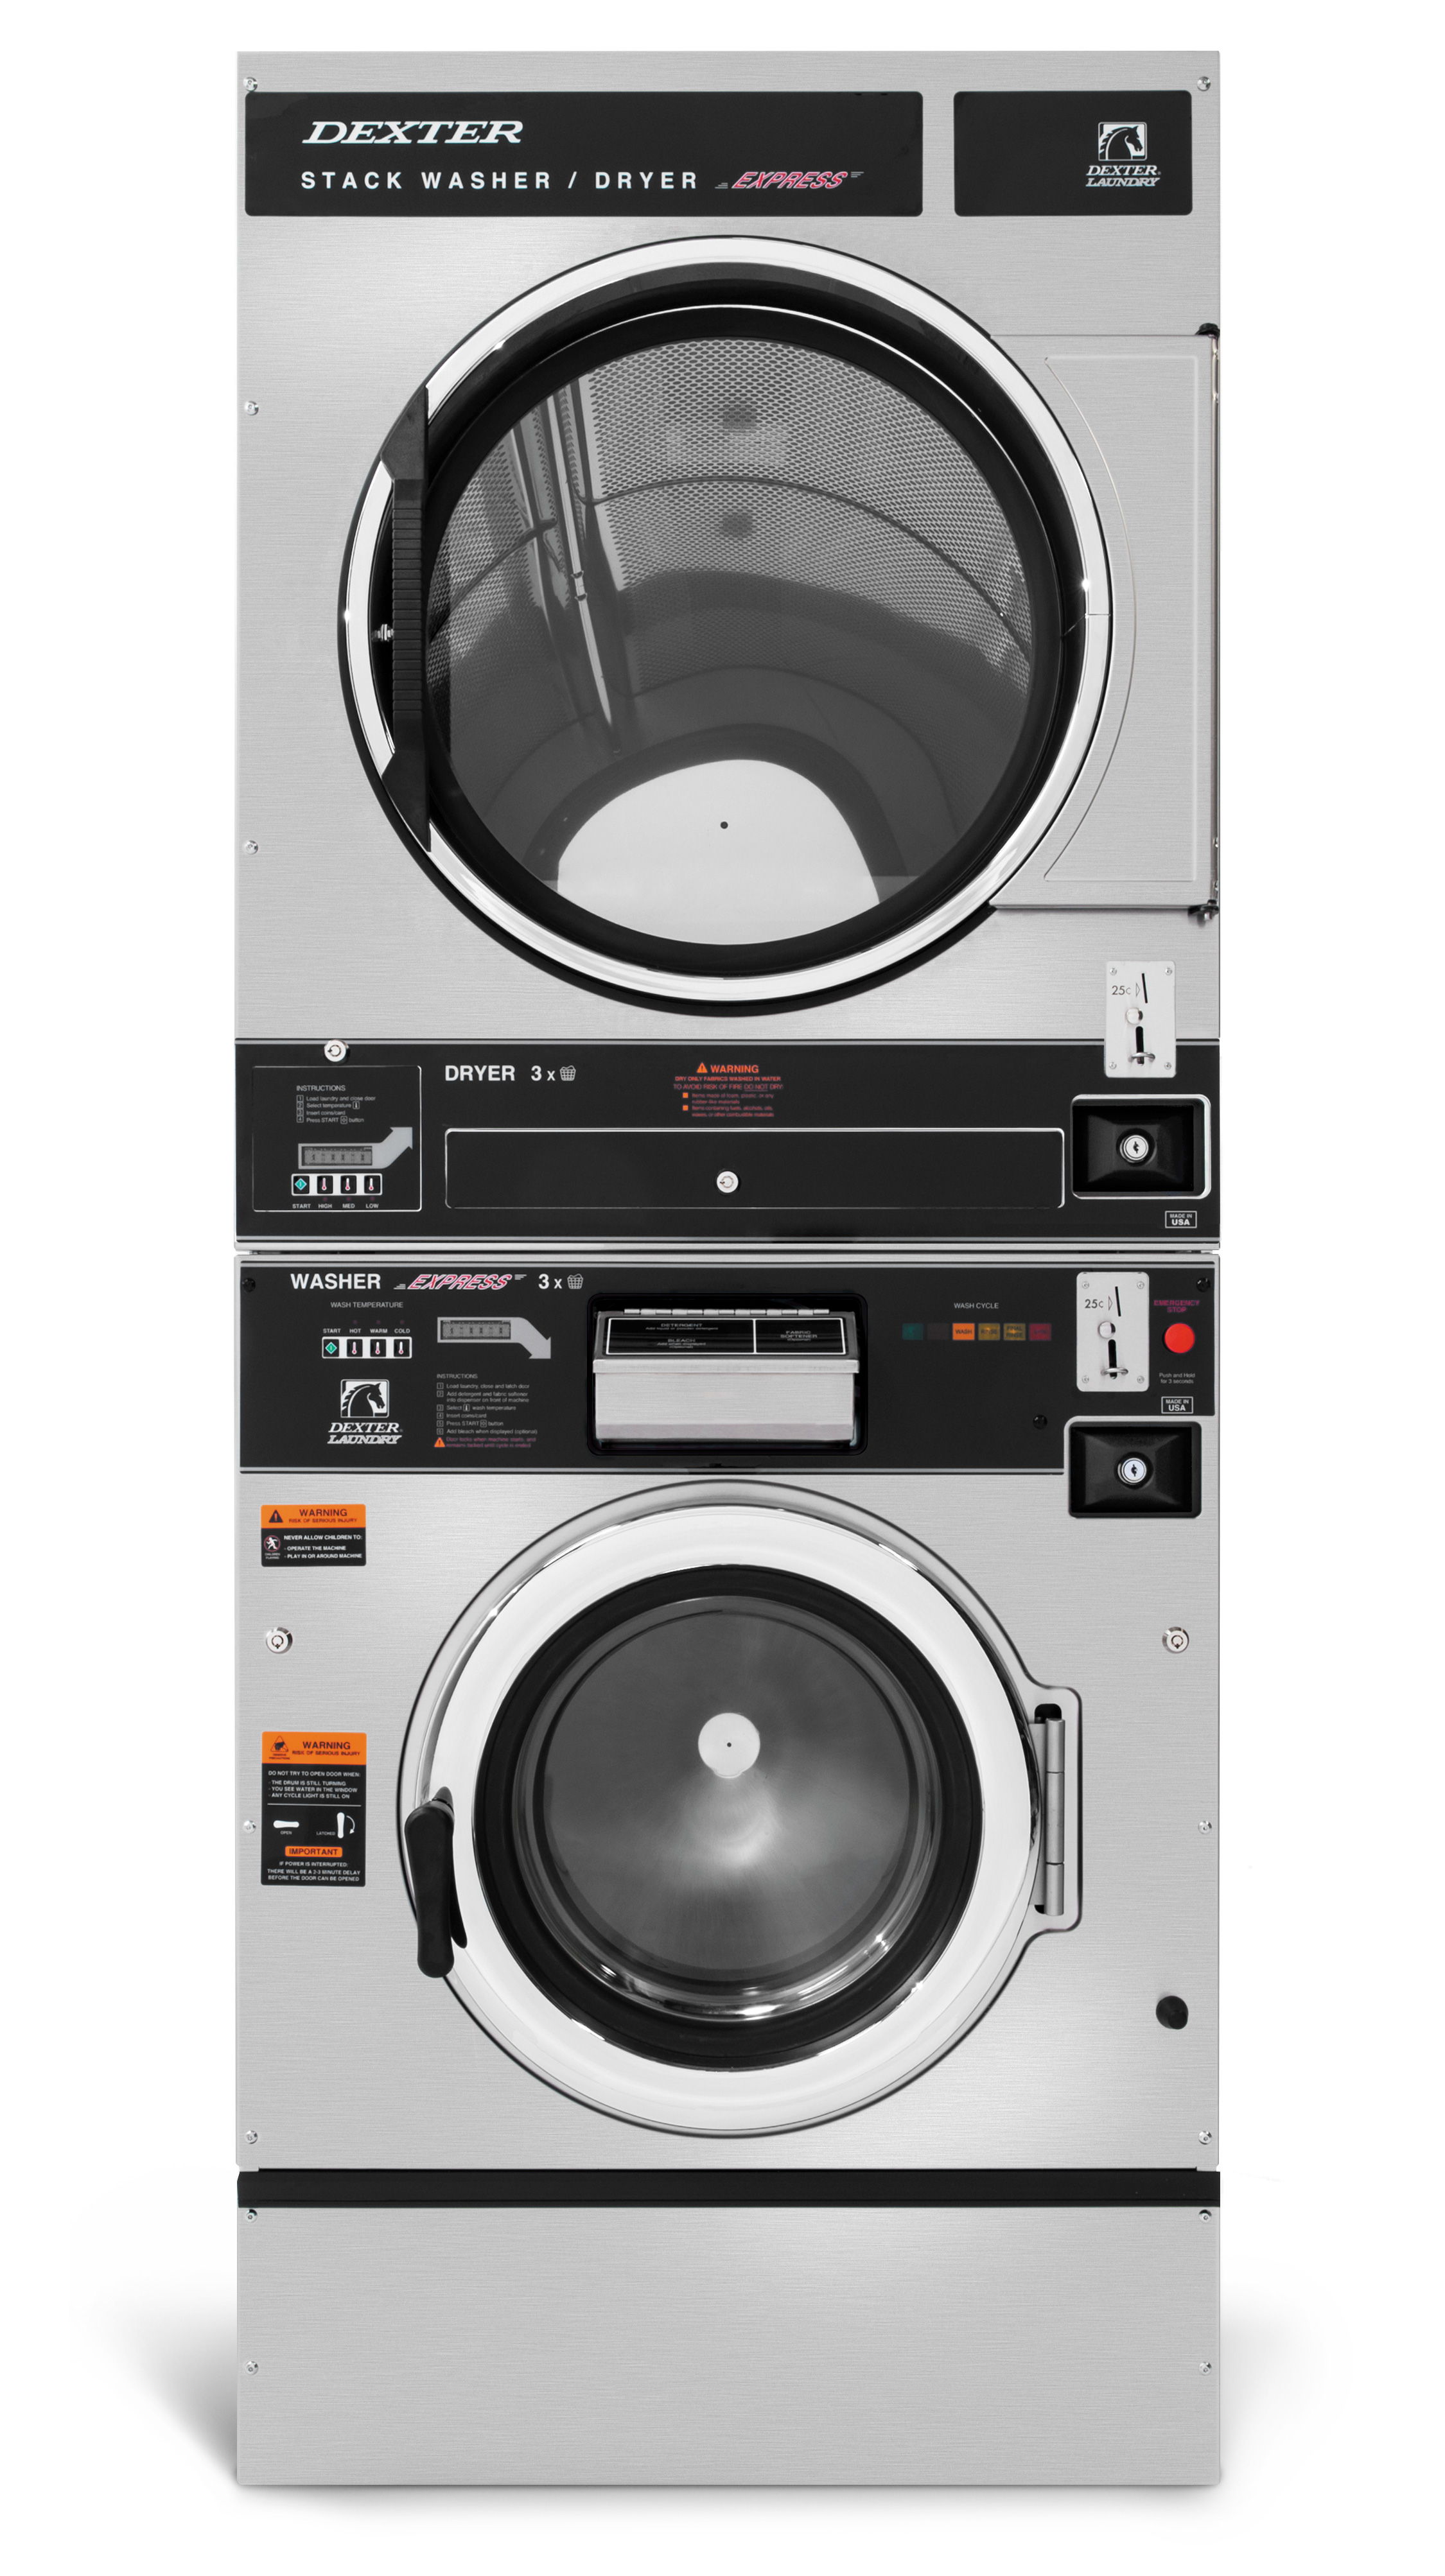 Dexter T-450 Washer Dryer Stack C Series Product Image